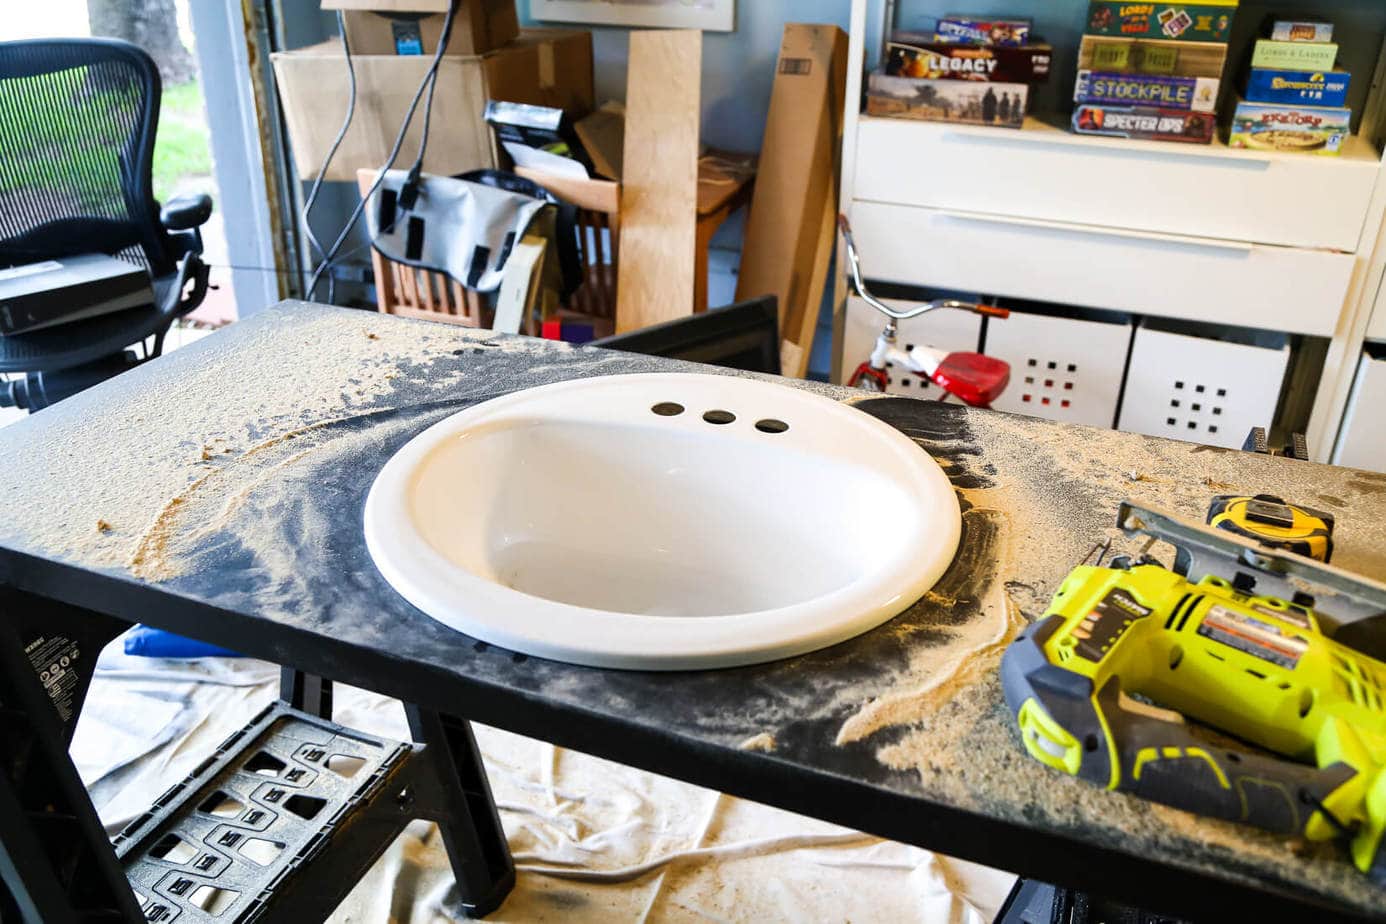 How to replace an ugly bathroom counter - it's quick, easy, and surprisingly affordable! Easy, budget-friendly option for getting a new counter in your bathroom without calling in a pro.